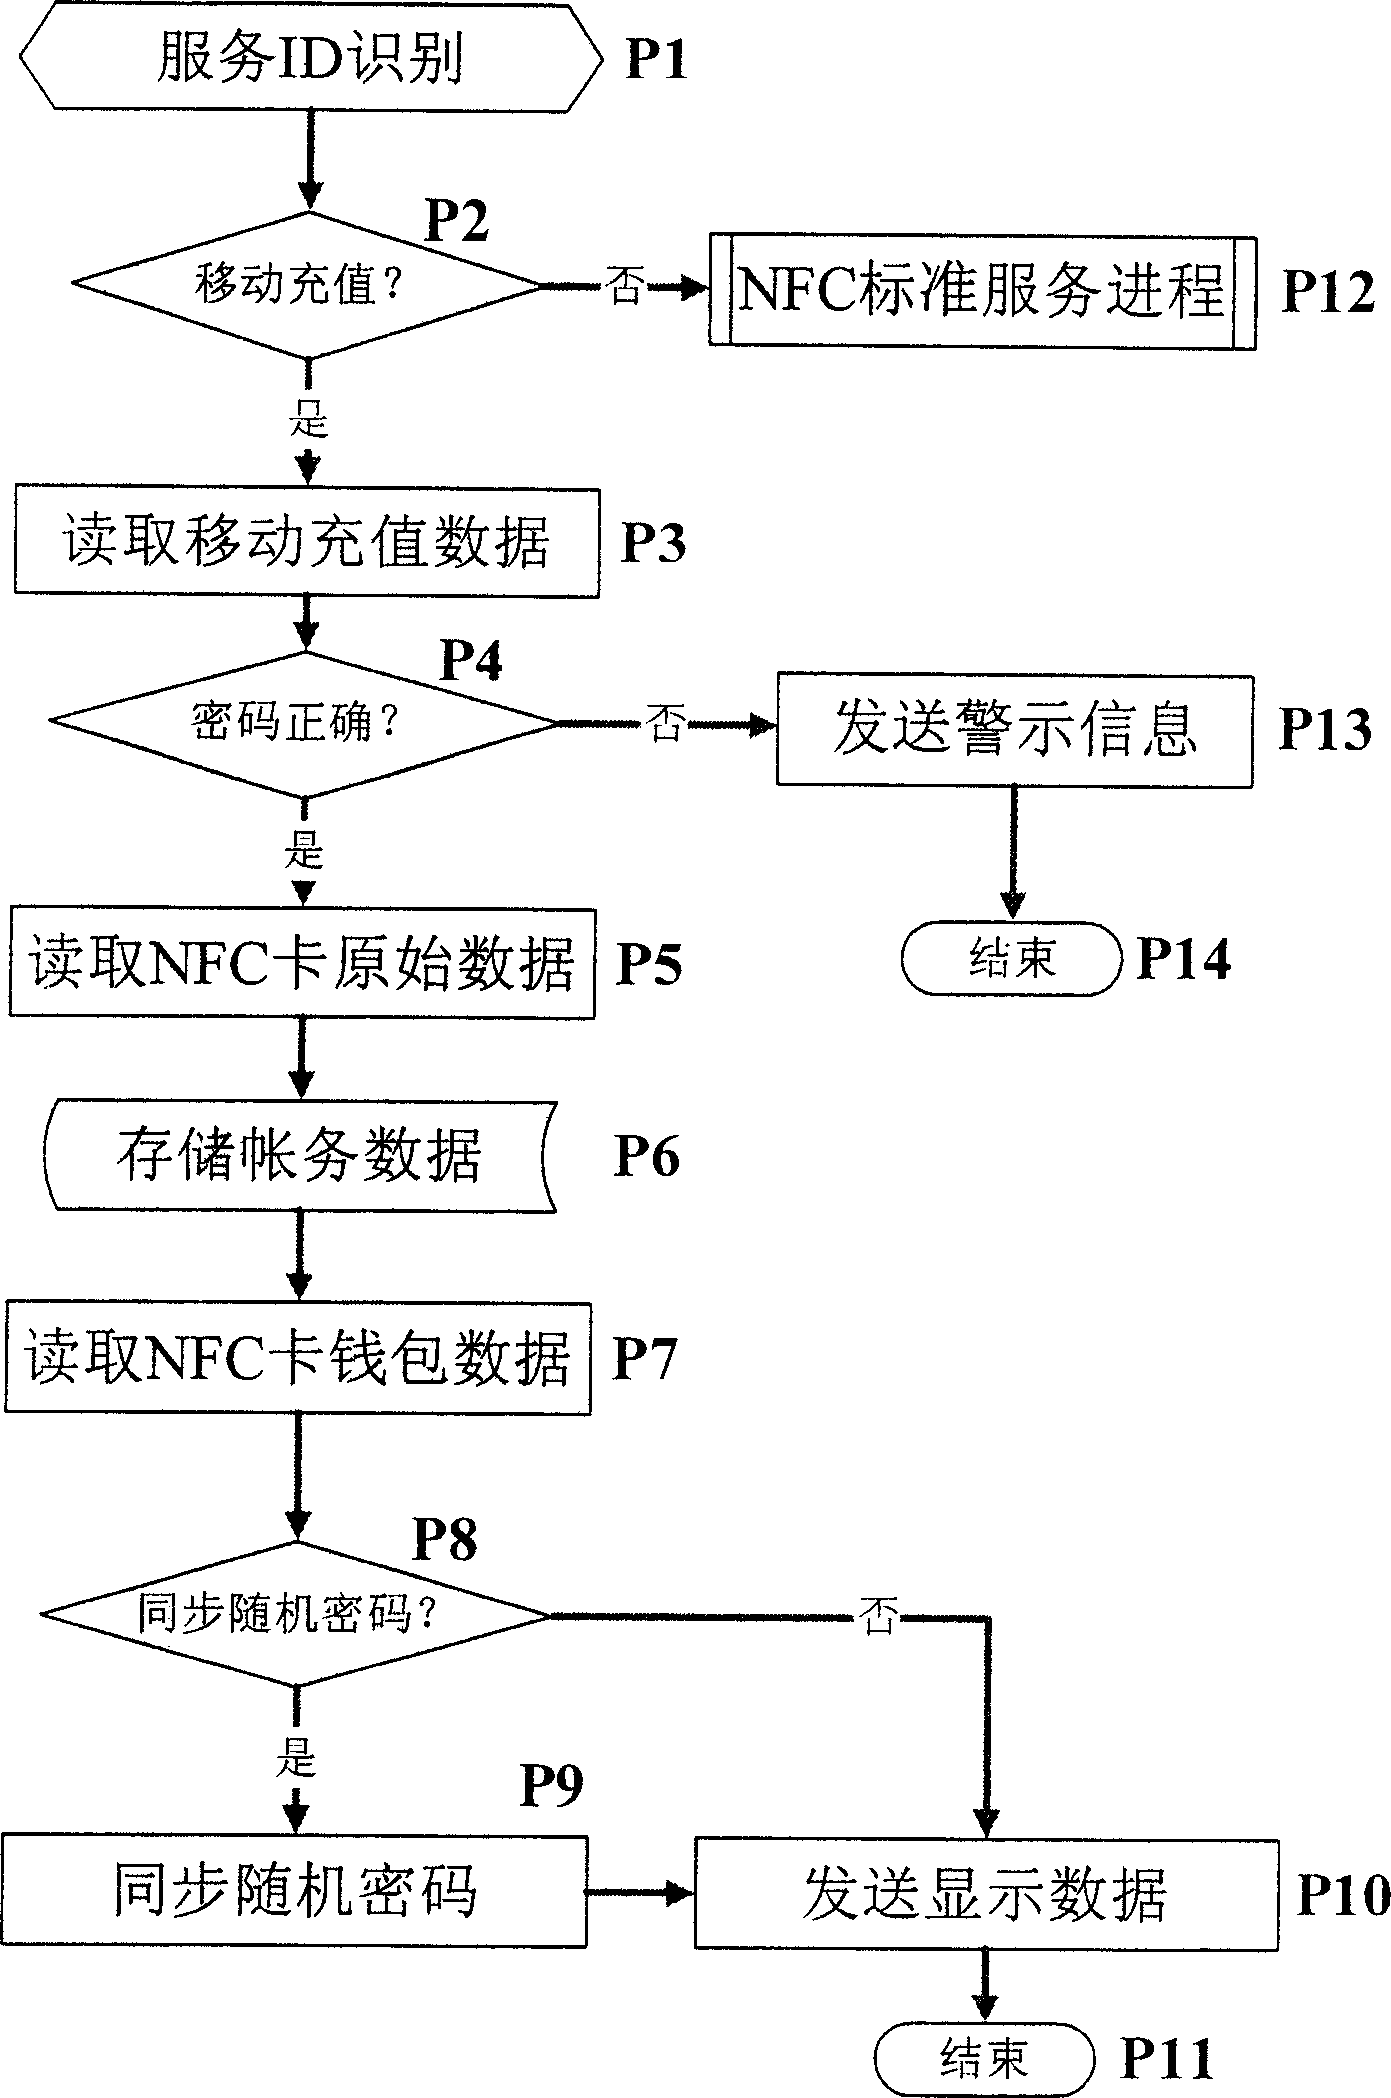 Mobile payment method based on mobile communication network